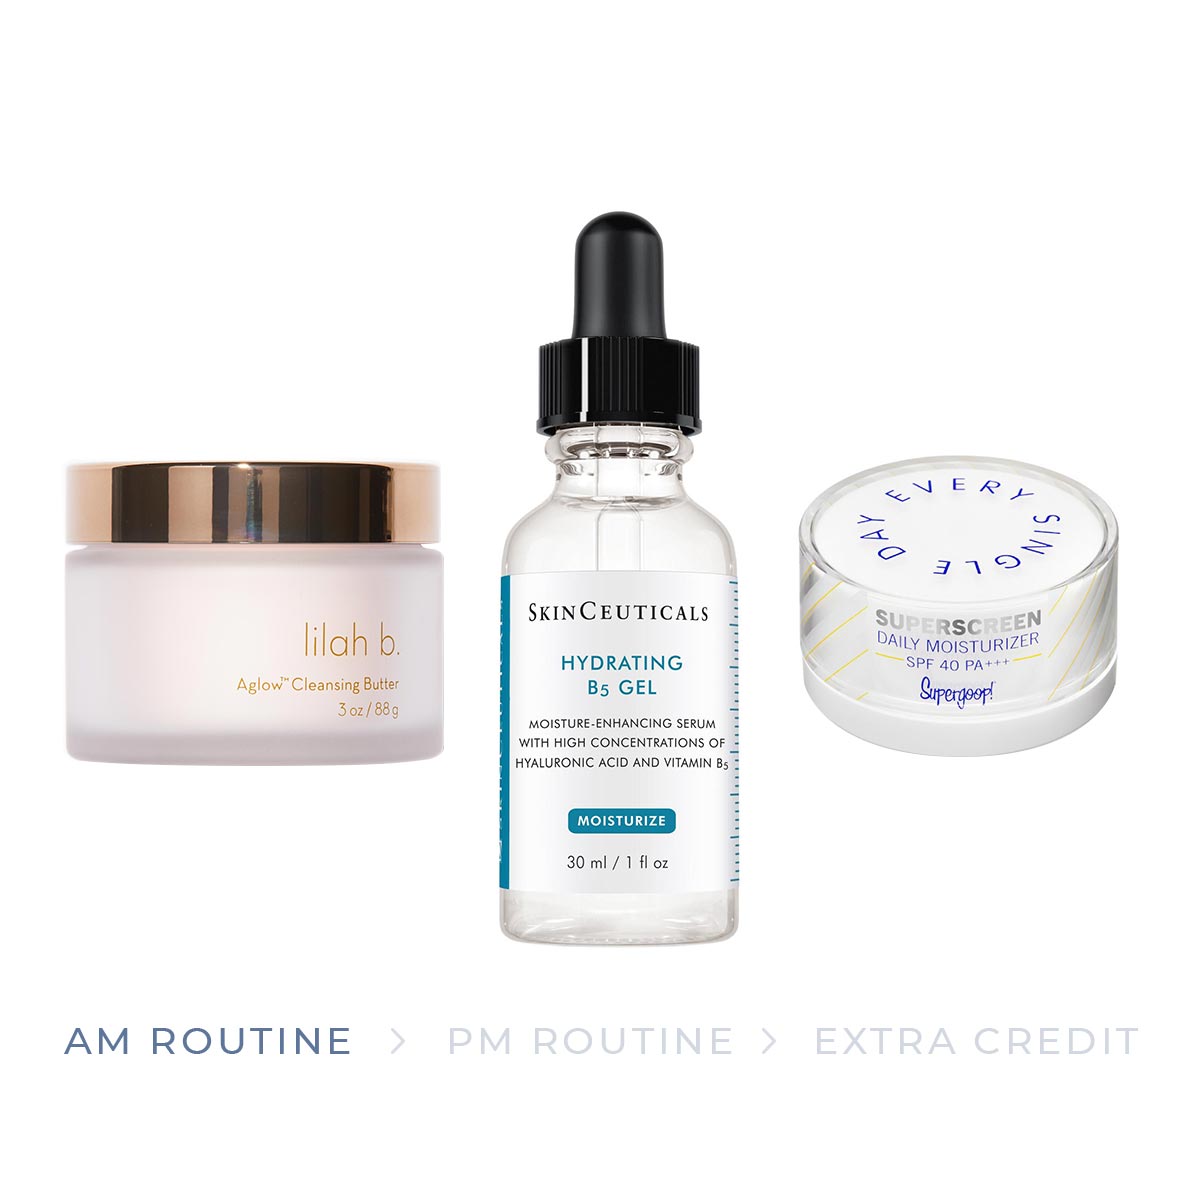 The products for the AM part of the dry skin skincare routine